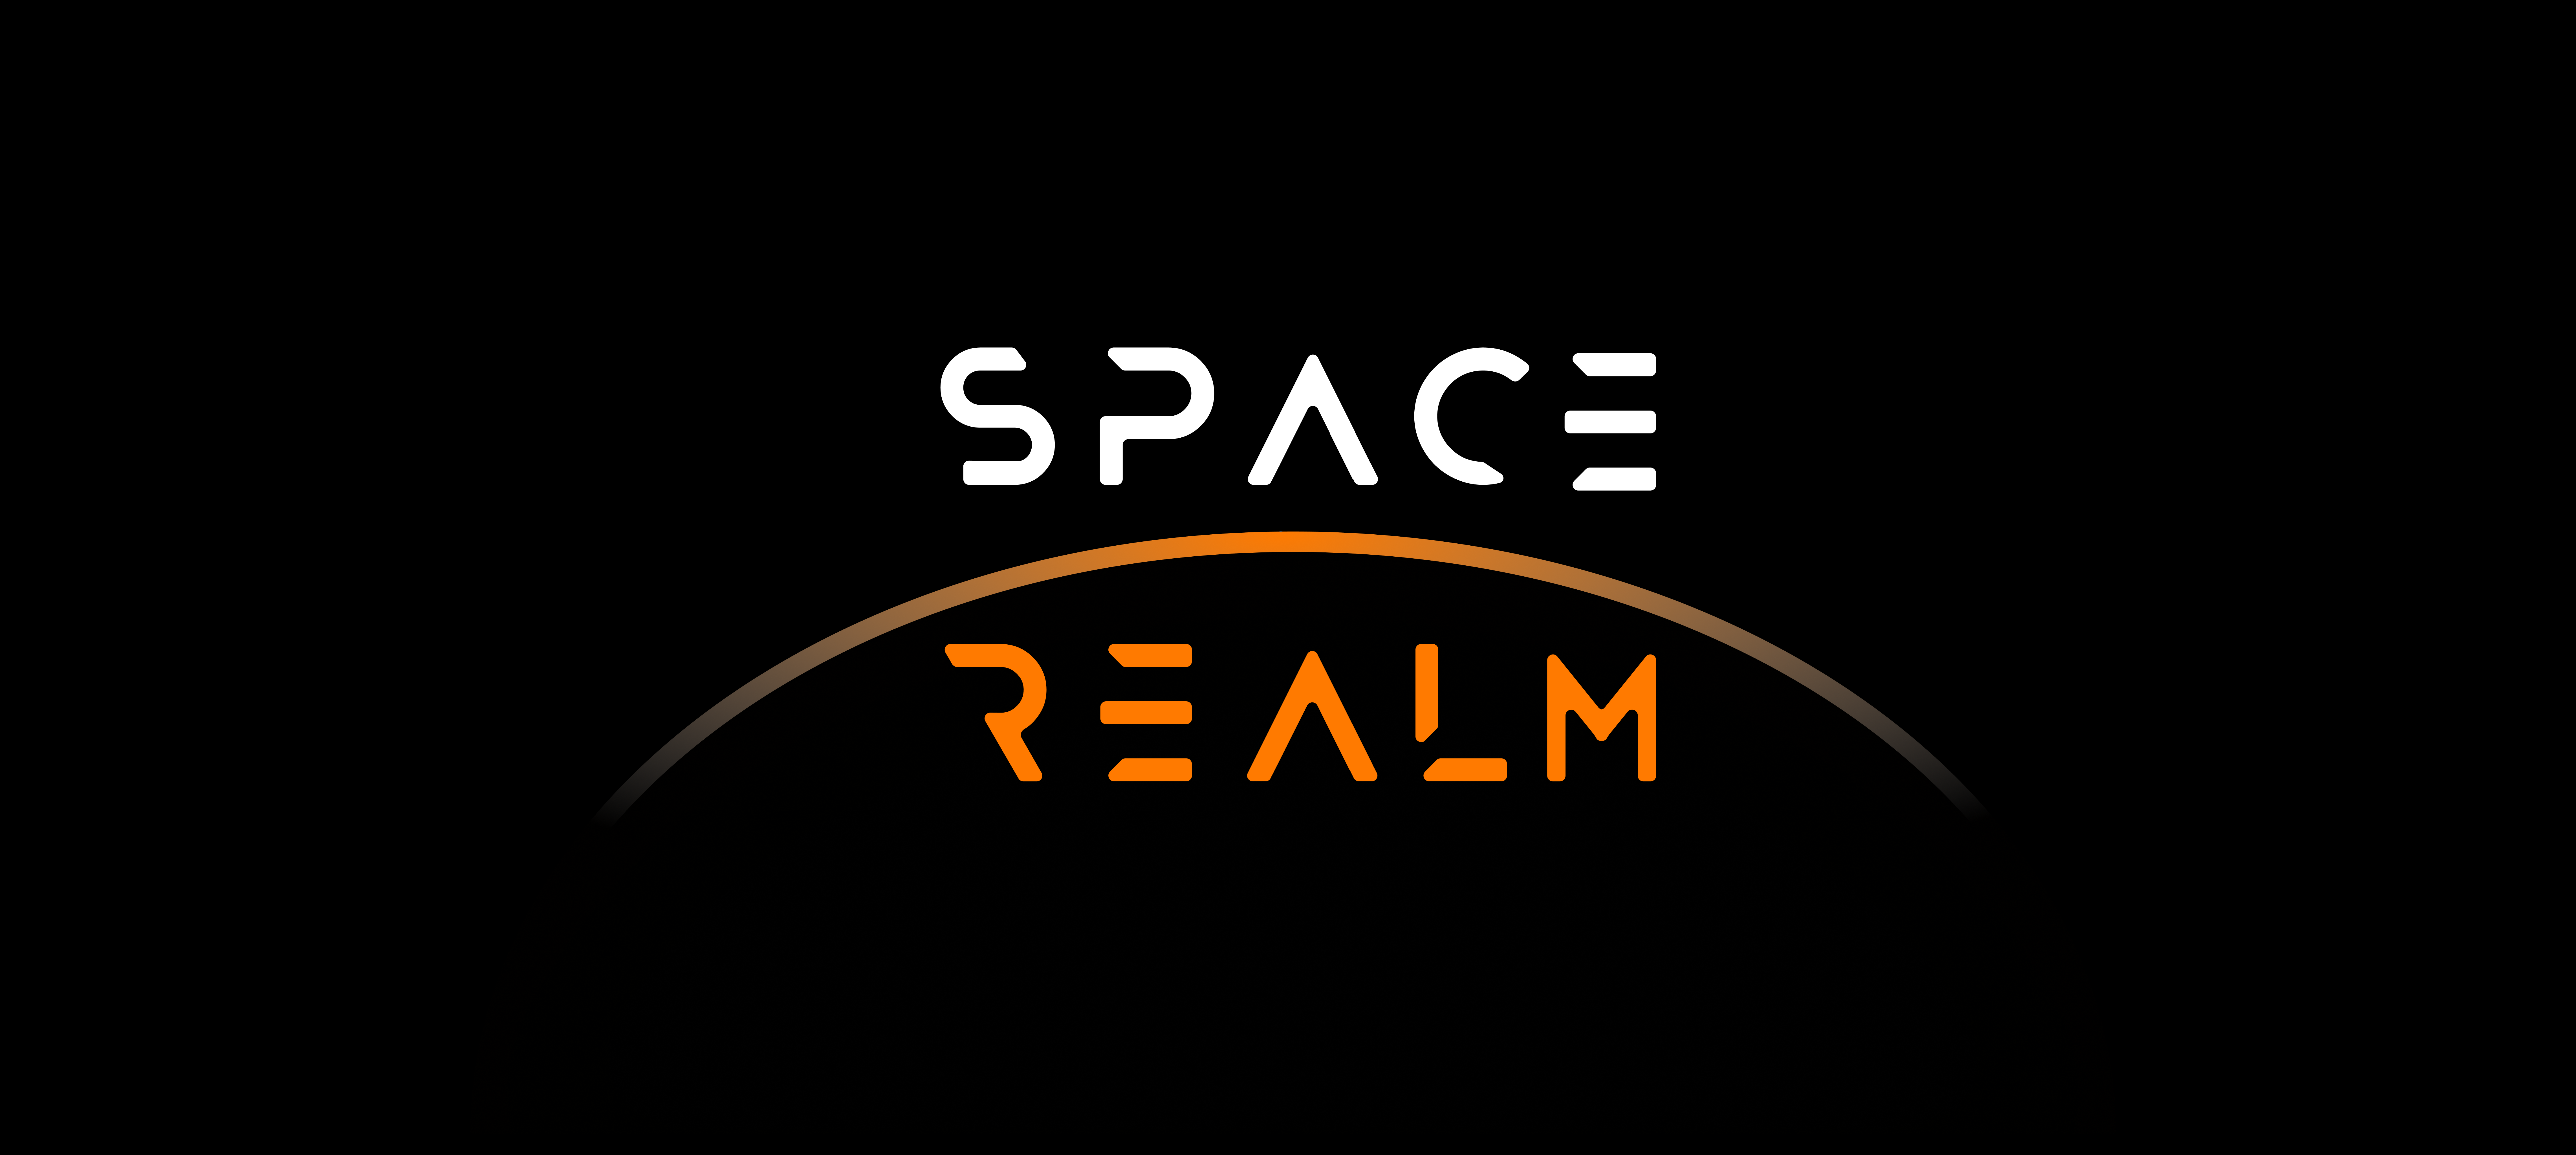 www.spacerealm.live